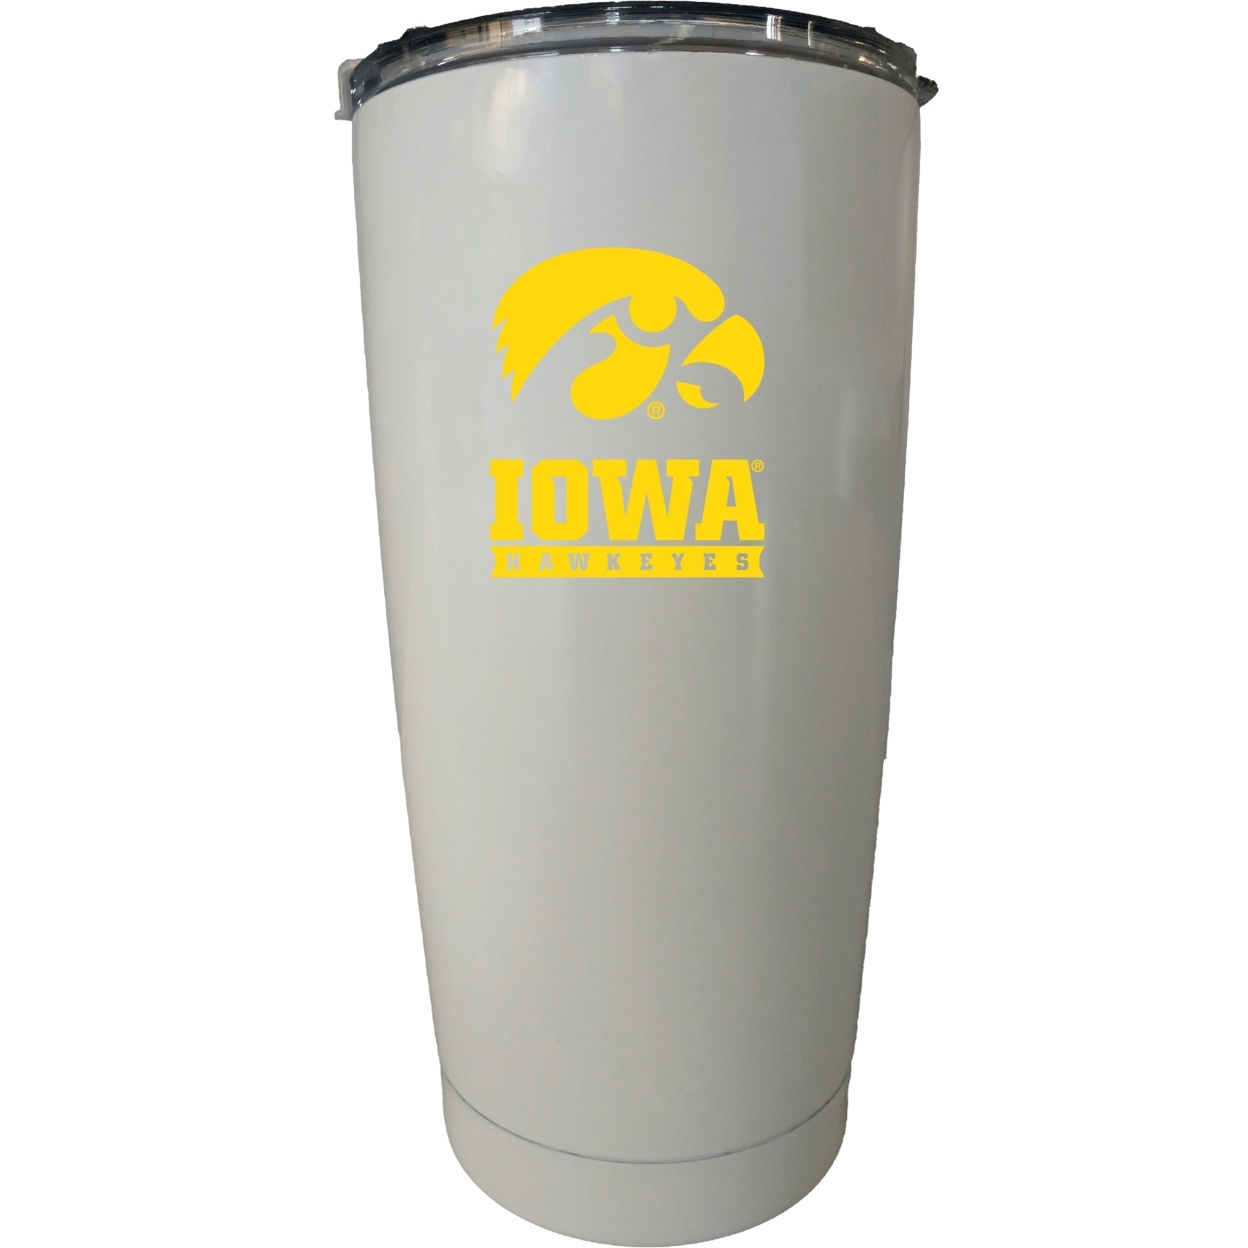 Iowa Hawkeyes 16 Oz Choose Your Color Insulated Stainless Steel Tumbler Choose Your Color.